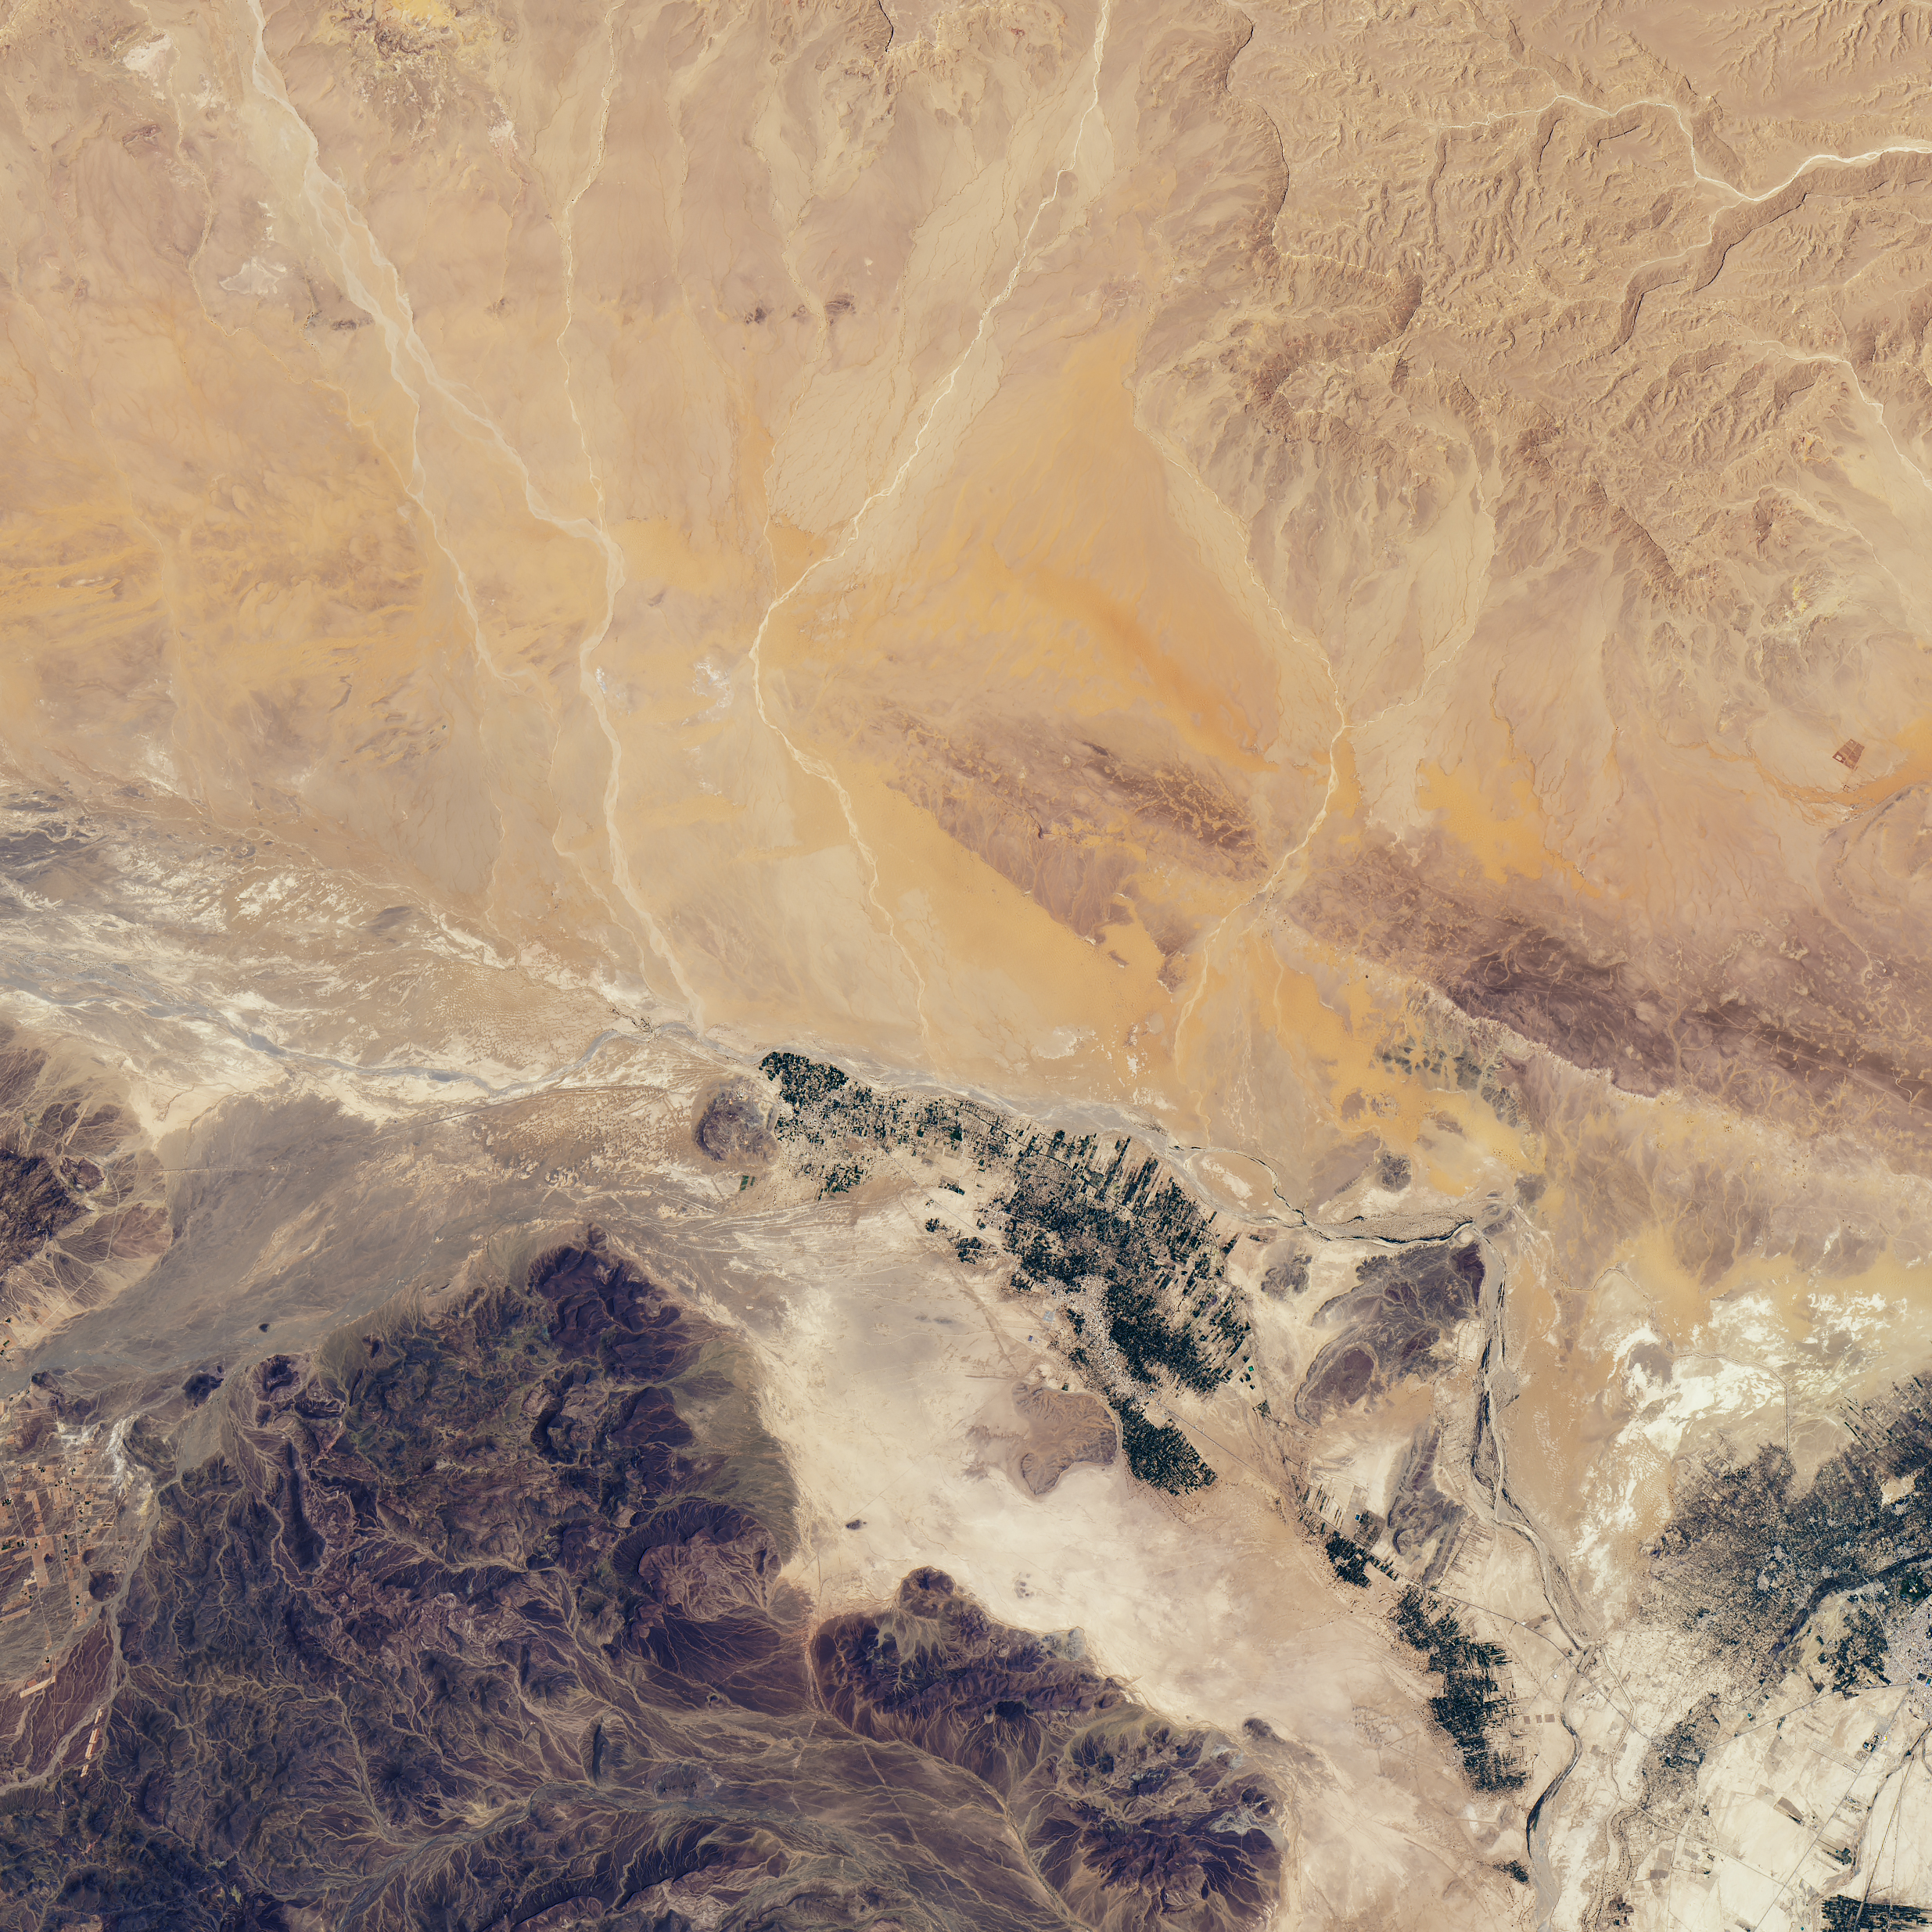 Ancient Waterways in Morocco  - related image preview